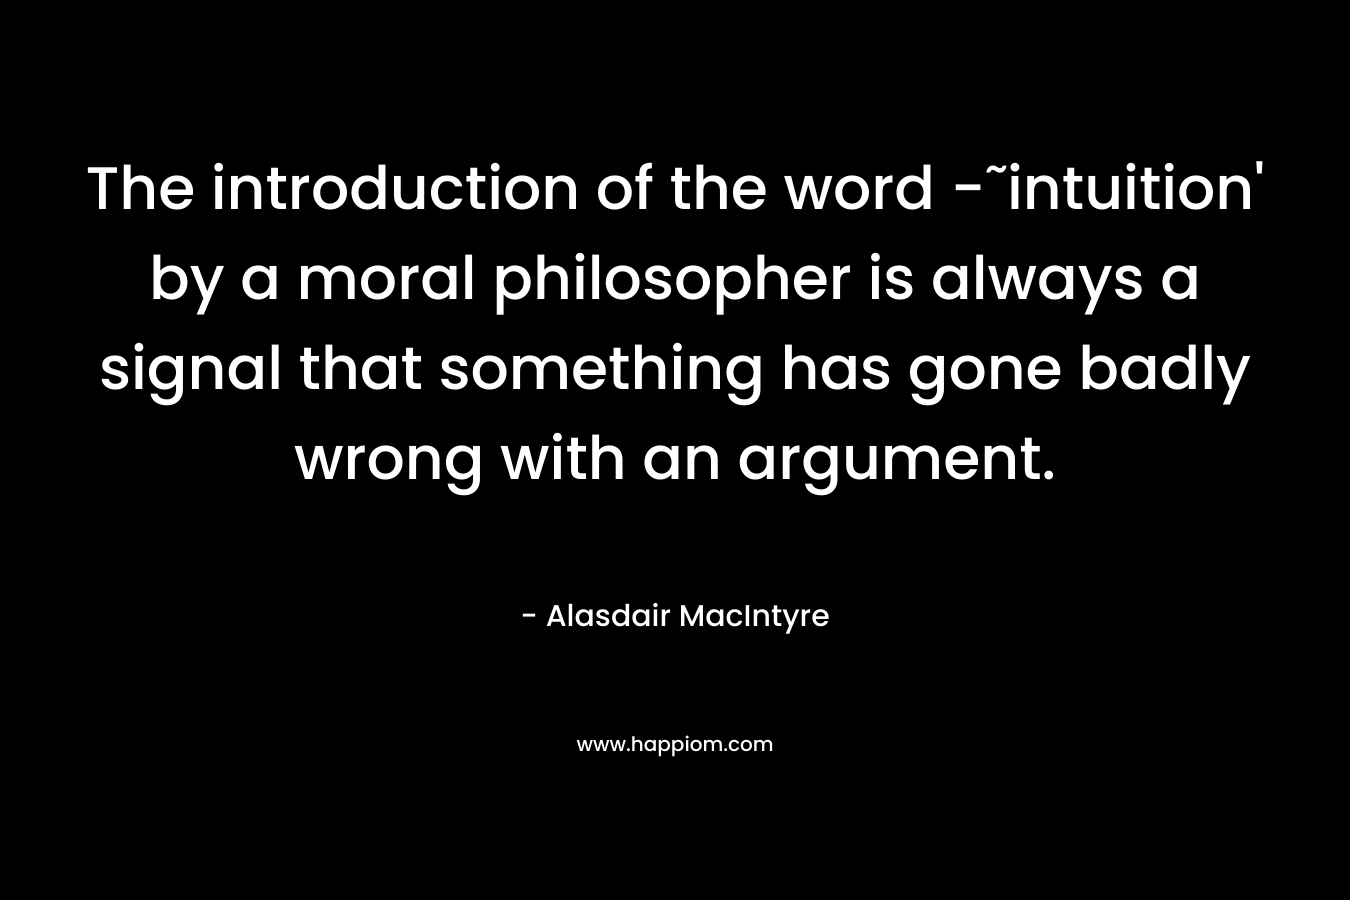 The introduction of the word -˜intuition’ by a moral philosopher is always a signal that something has gone badly wrong with an argument. – Alasdair MacIntyre